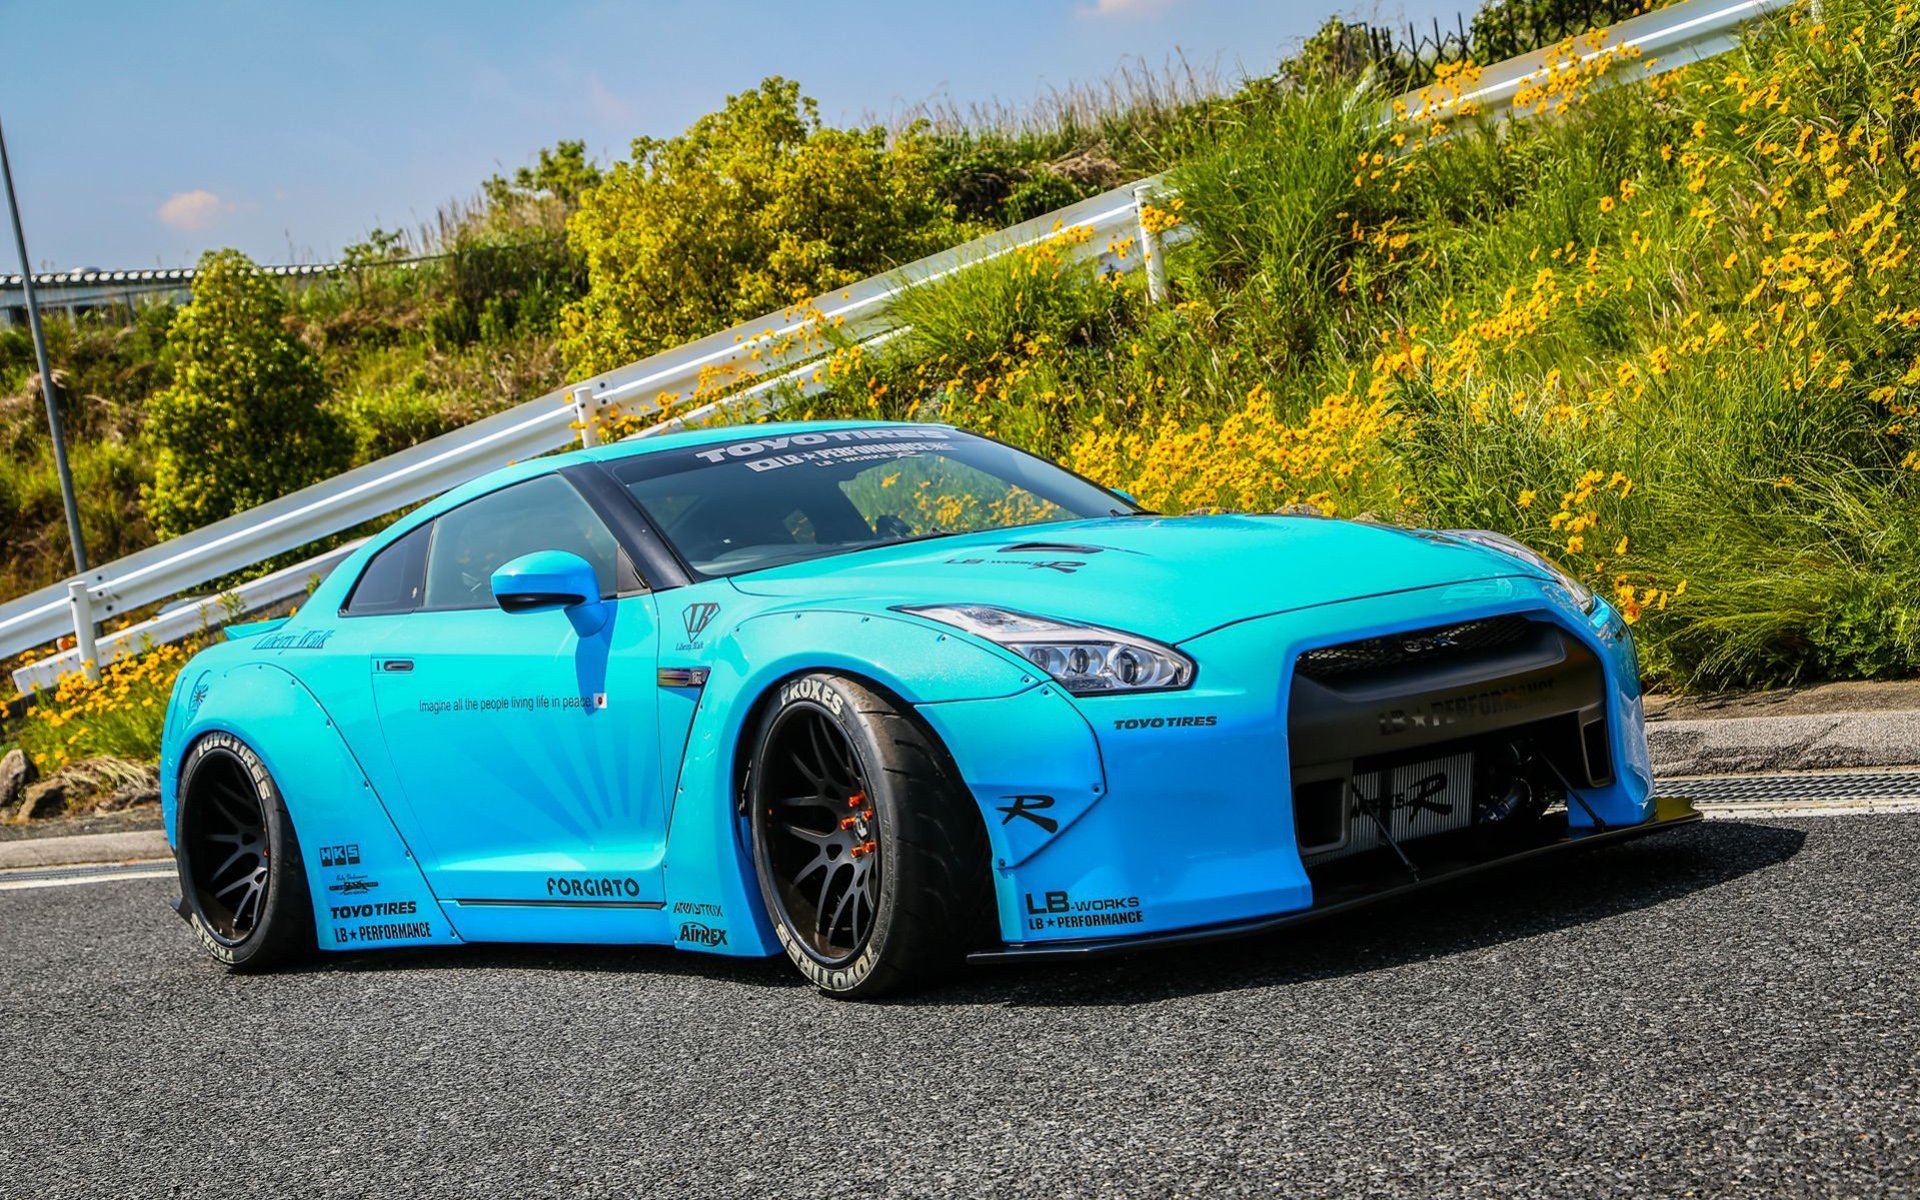 Download wallpapers Liberty Walk, tuning, Nissan GT-R, R35, supercars ...